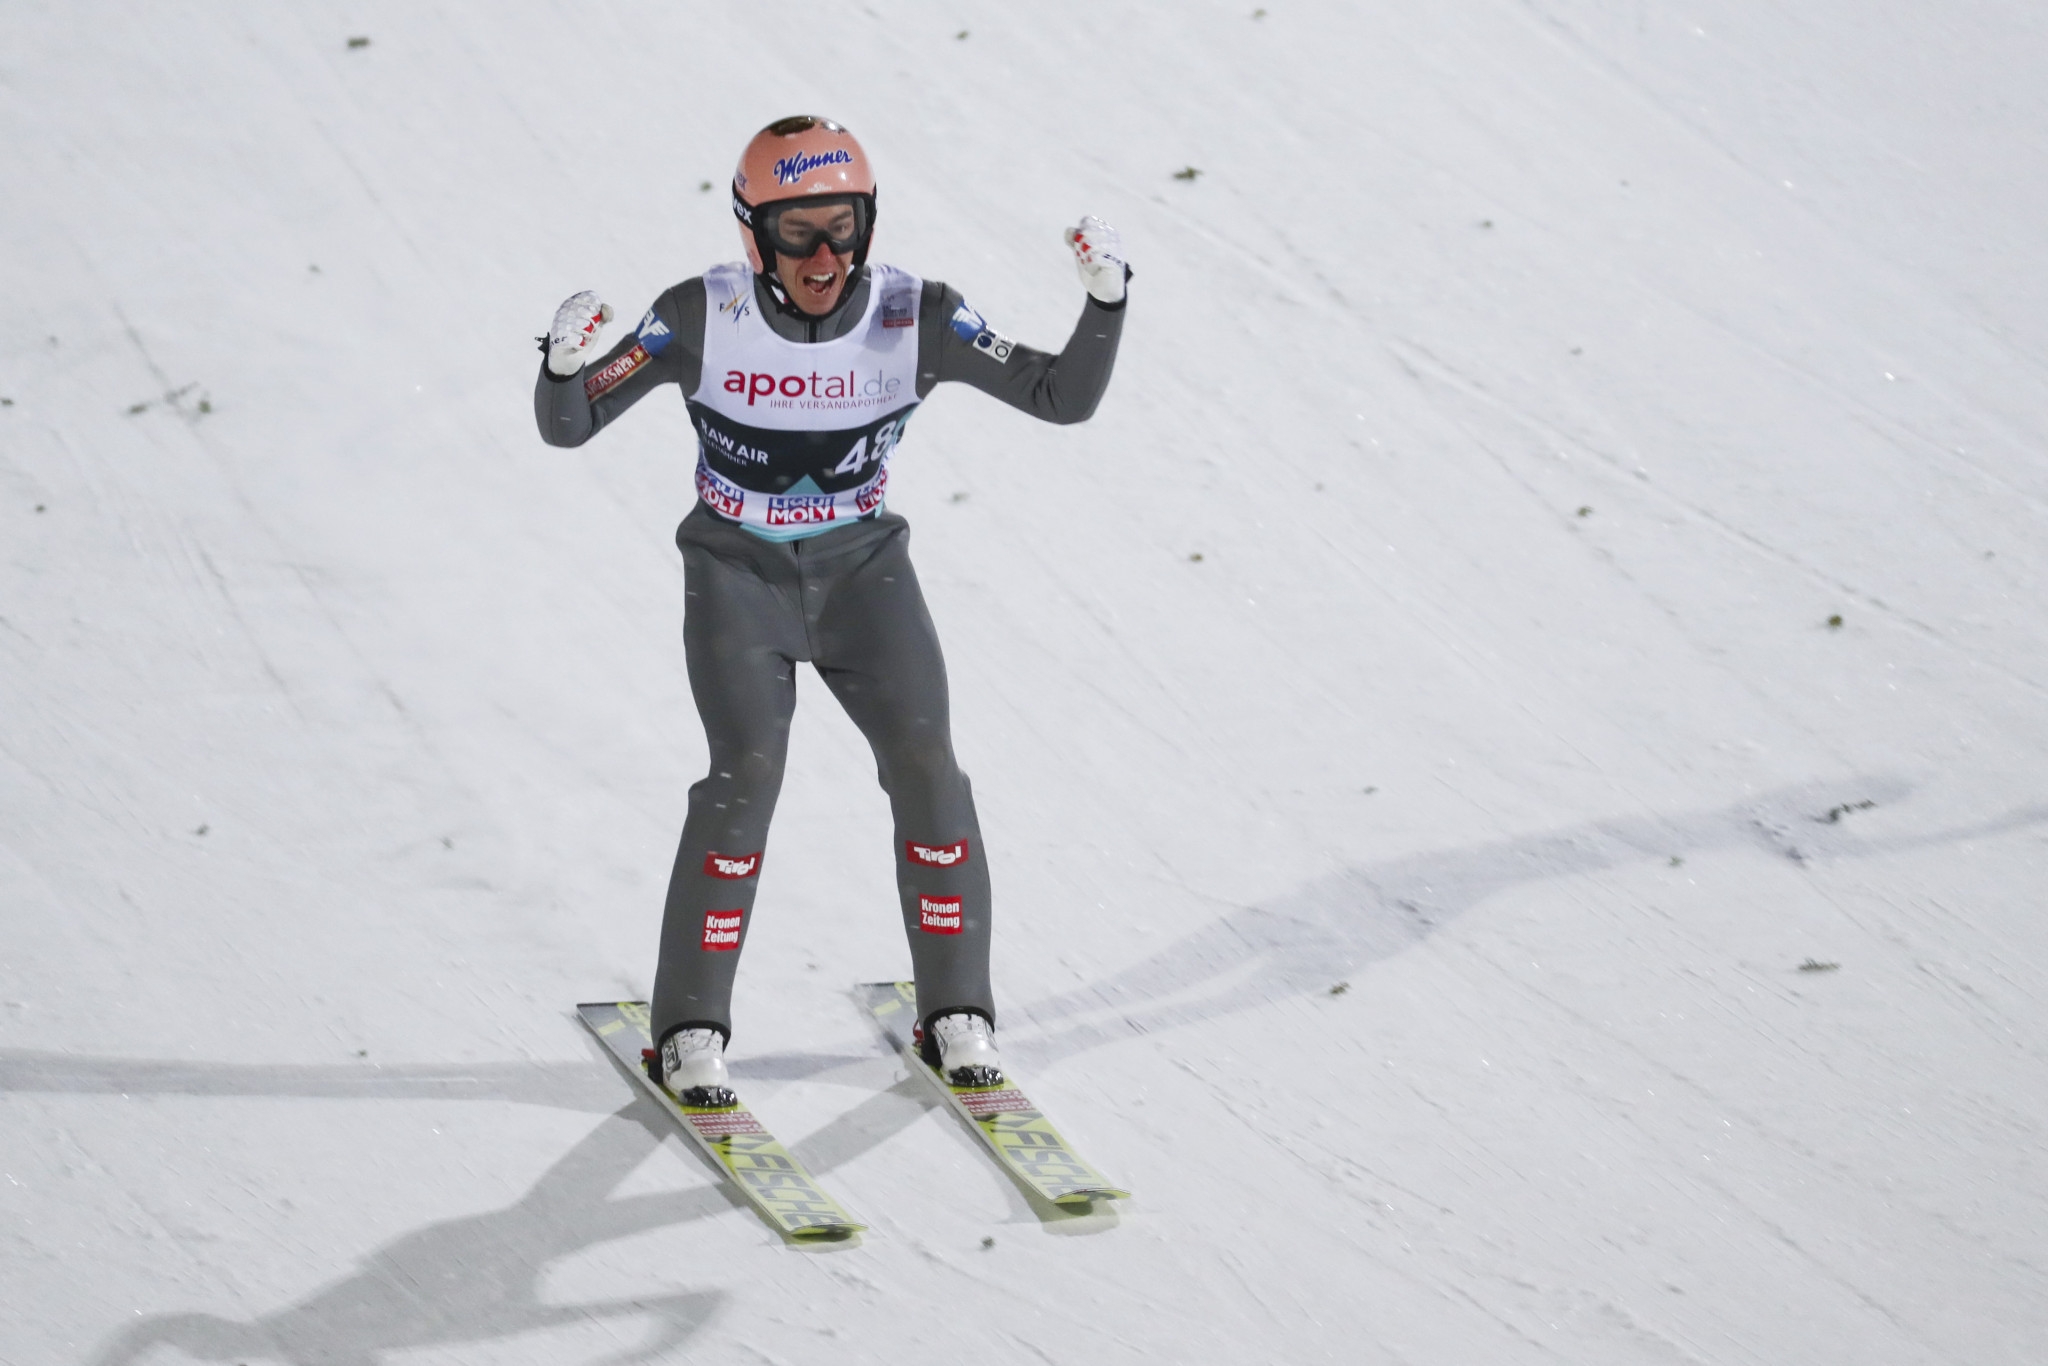 Kraft beats home favourite Johansson to victory at FIS Ski Jumping World Cup in Lillehammer